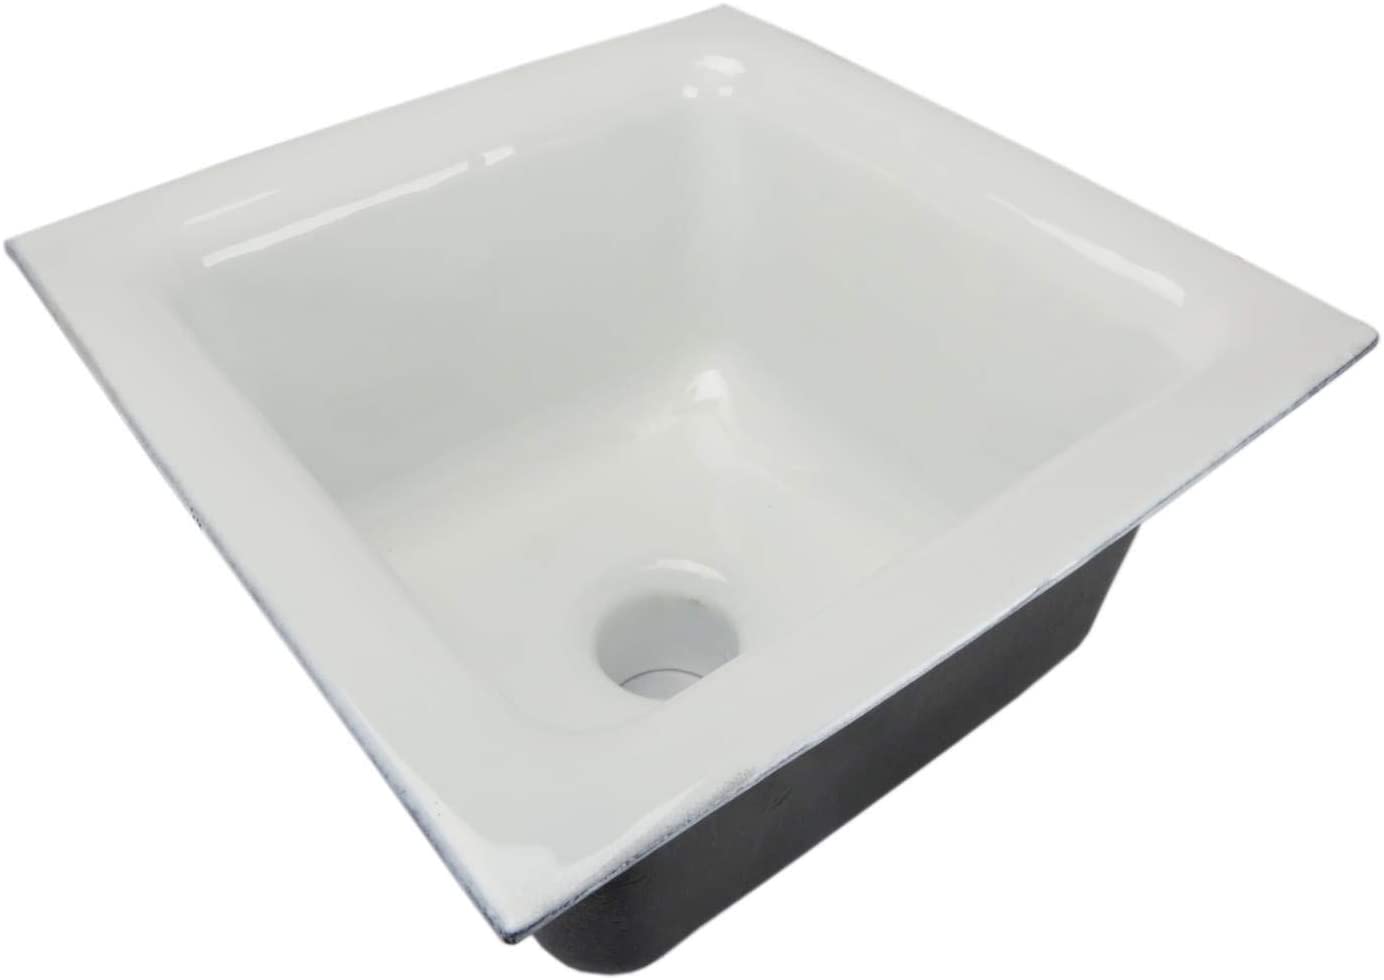 GSW Floor Sink with Dome Strainer, Cast Iron Body & Ceramic Surface 12”W x 12”L x 6”H - Perfect for Restaurant, Bar, Buffet (3” Drain)